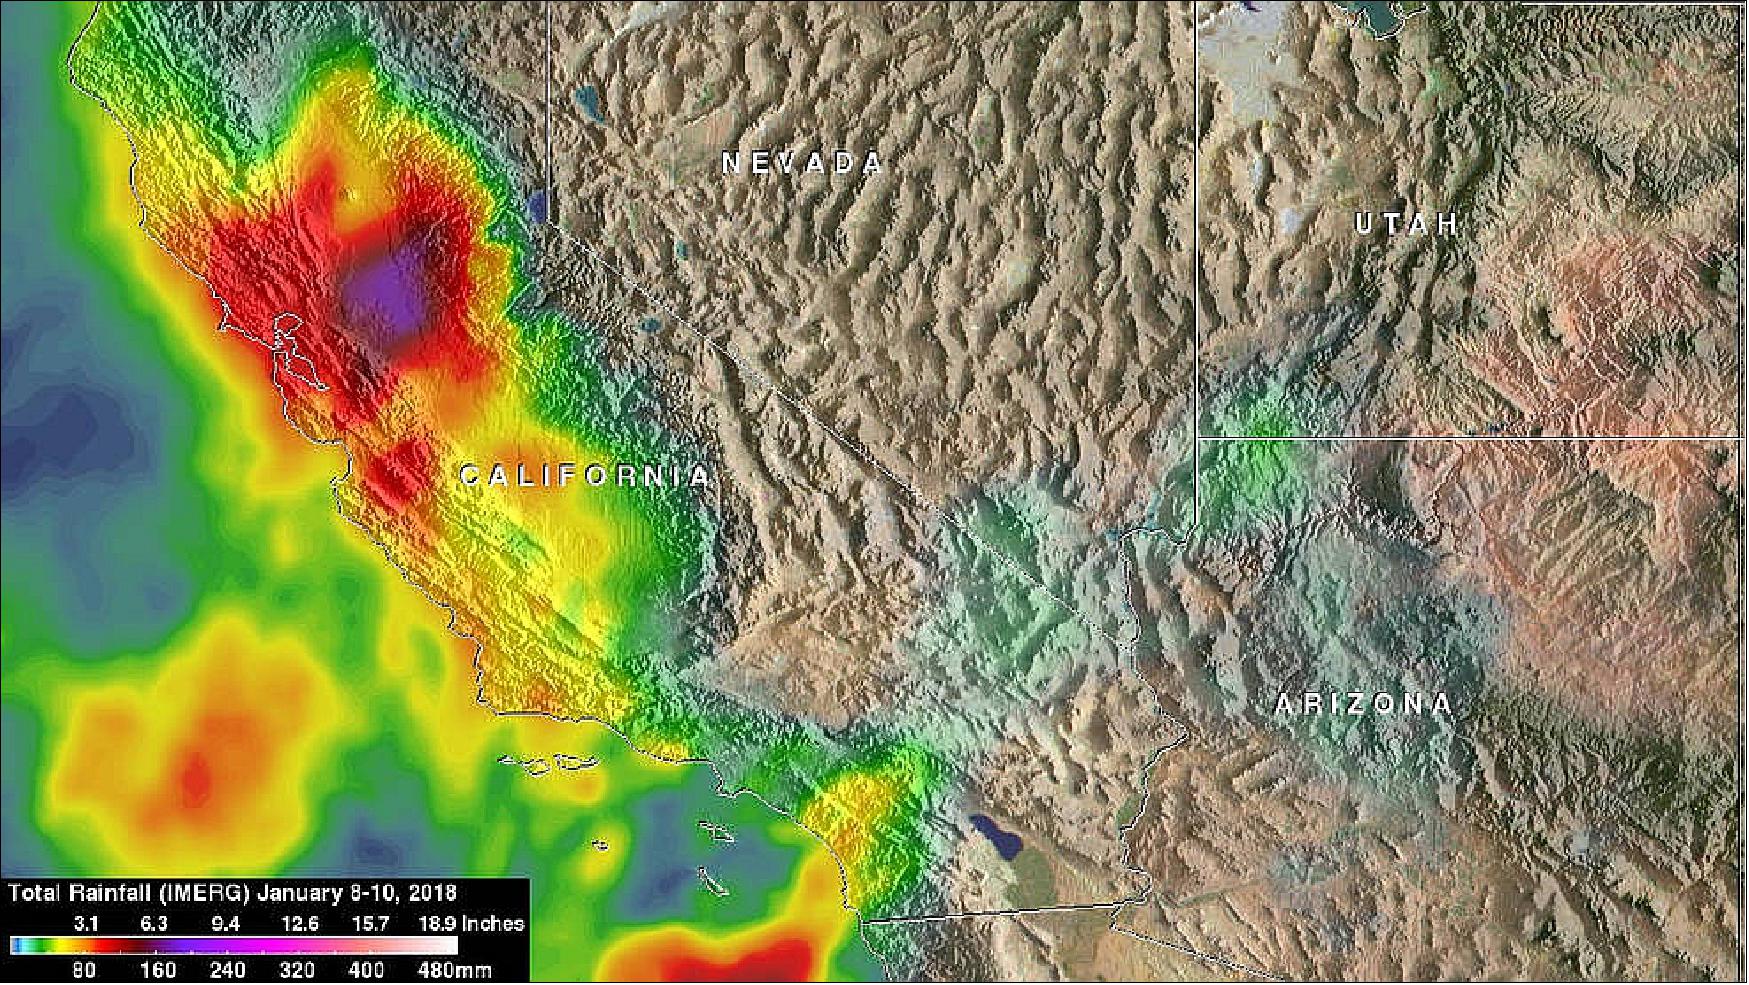 Figure 39: NASA's IMERG (Integrated Multi-Satellite Retrievals for GPM) analysis of Jan 8 through 10, 2018 revealed that the heaviest rainfall occurred over the Sacramento Valley where over 8 inches (203 mm) were indicated. A rainfall total of 5 inches (127 mm) was reported in Ventura County (image credit: NASA/JAXA/Hal Pierce)